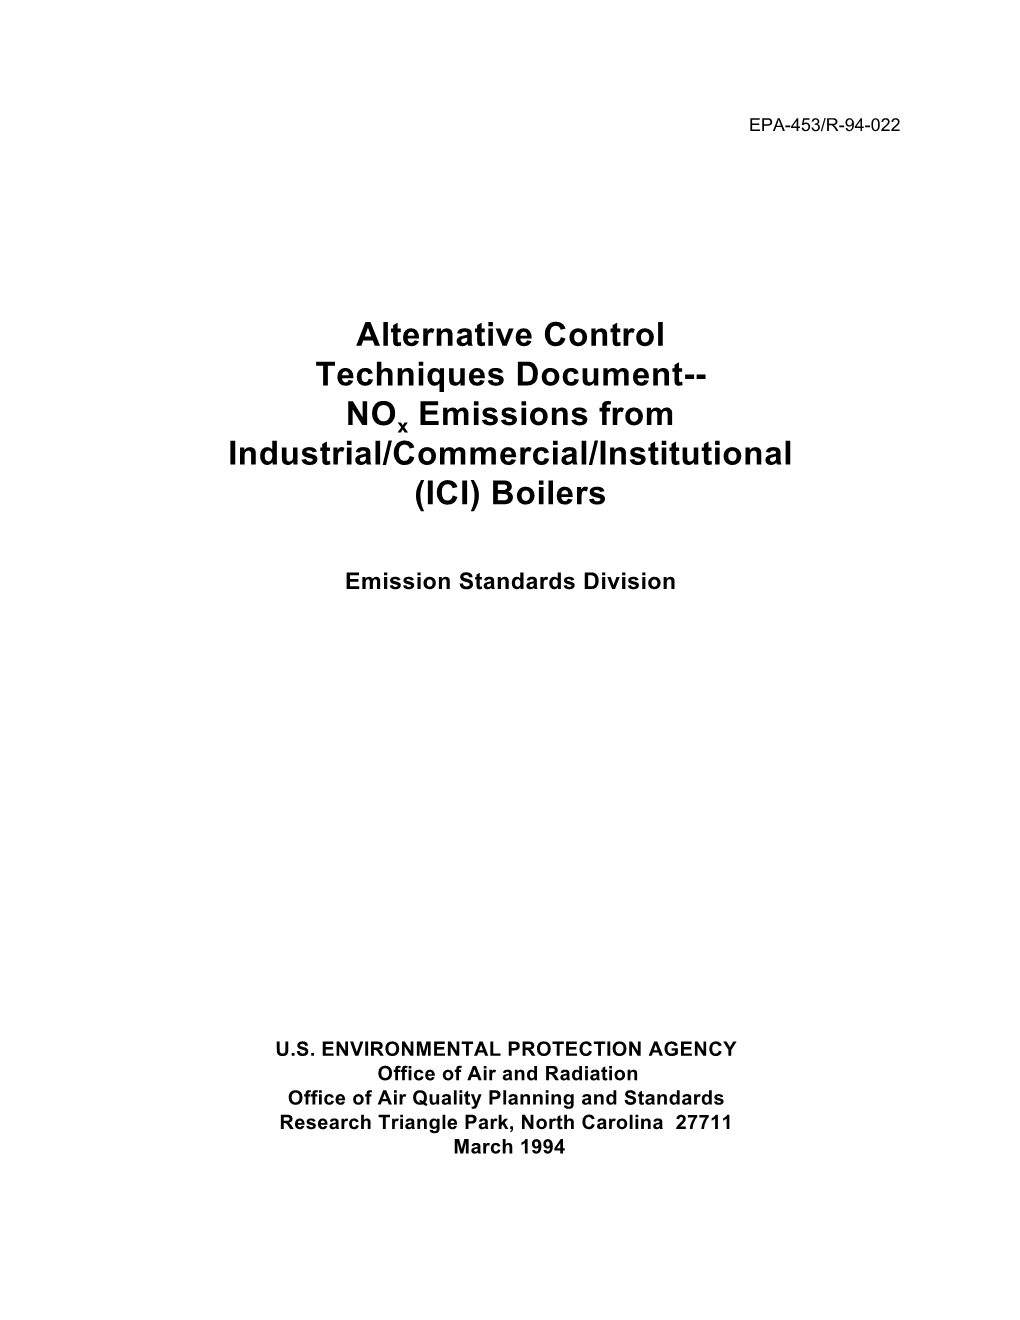 Industrial/Commercial/Institutional (ICI) Boilers